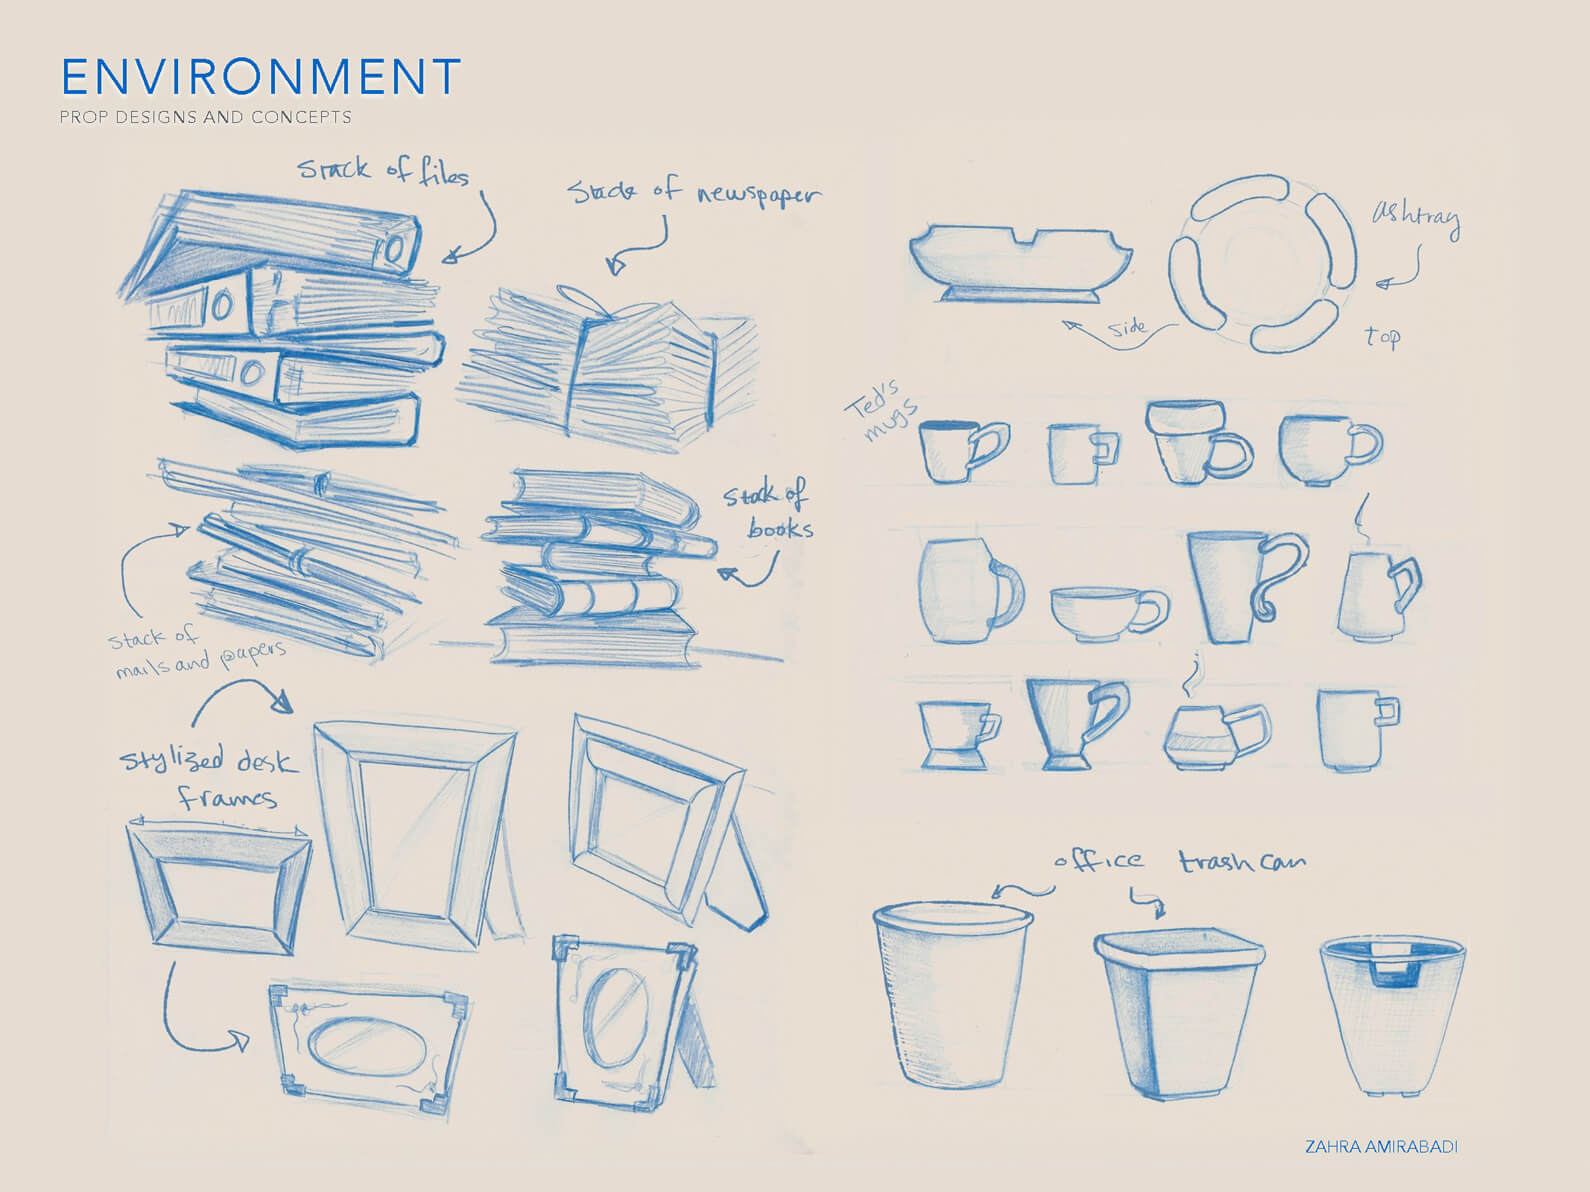 Blue line sketches of concepts for paper stack, picture frame, trash can, and cup props for Orientation Center for the Unseen